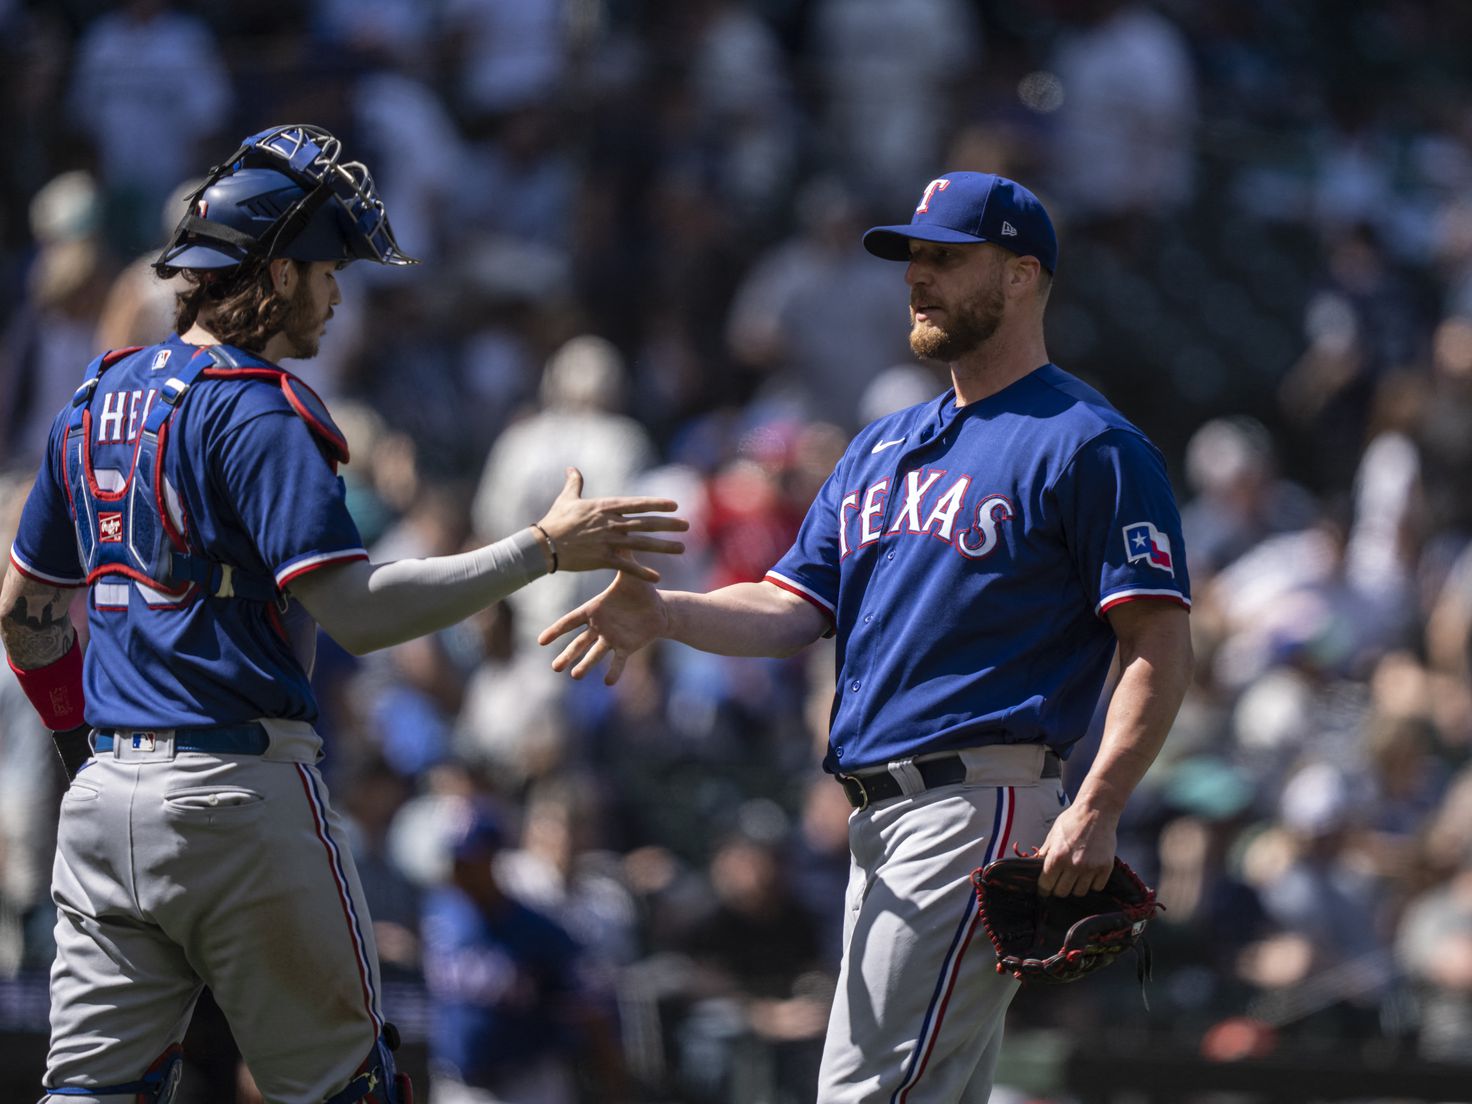 The Rangers just signed the best pitcher in baseball, but there remains  work to do